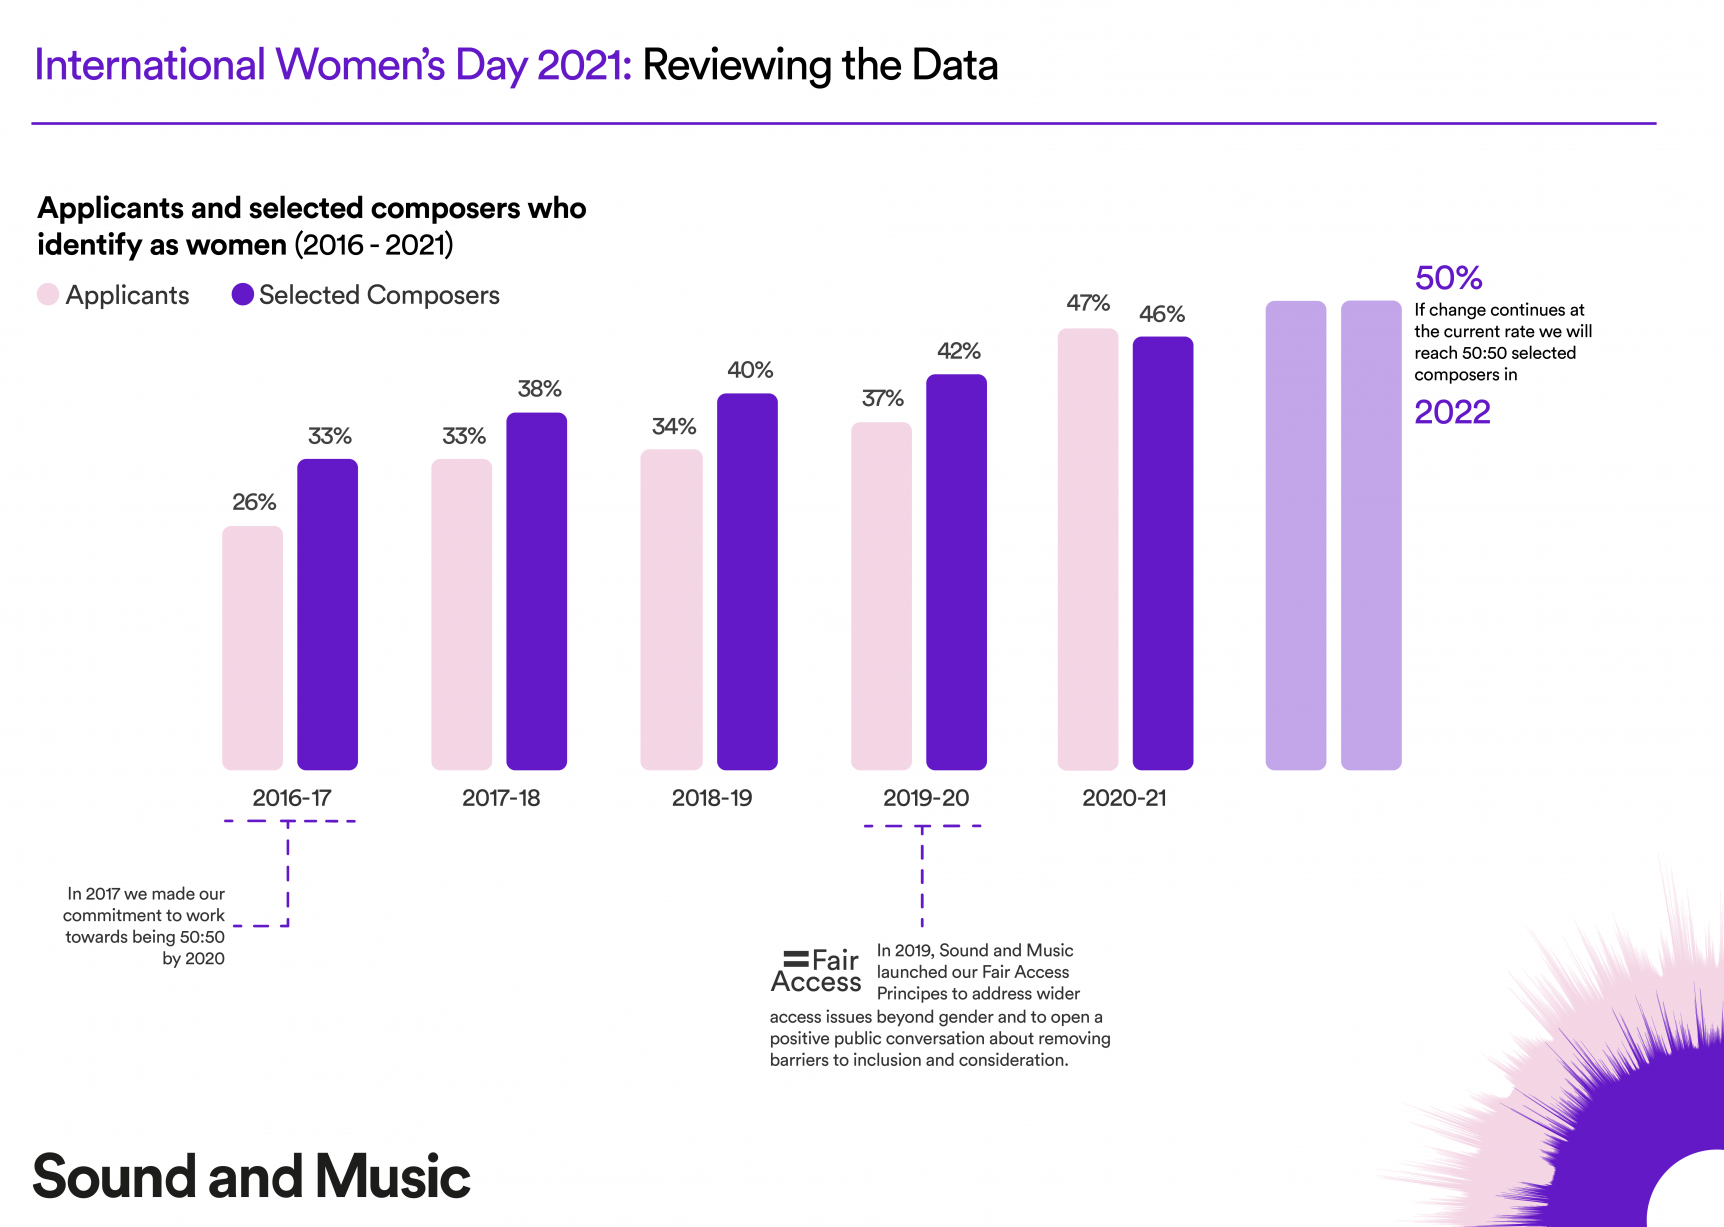 International Women's Day 2021 Reviewing the data Sound and Music